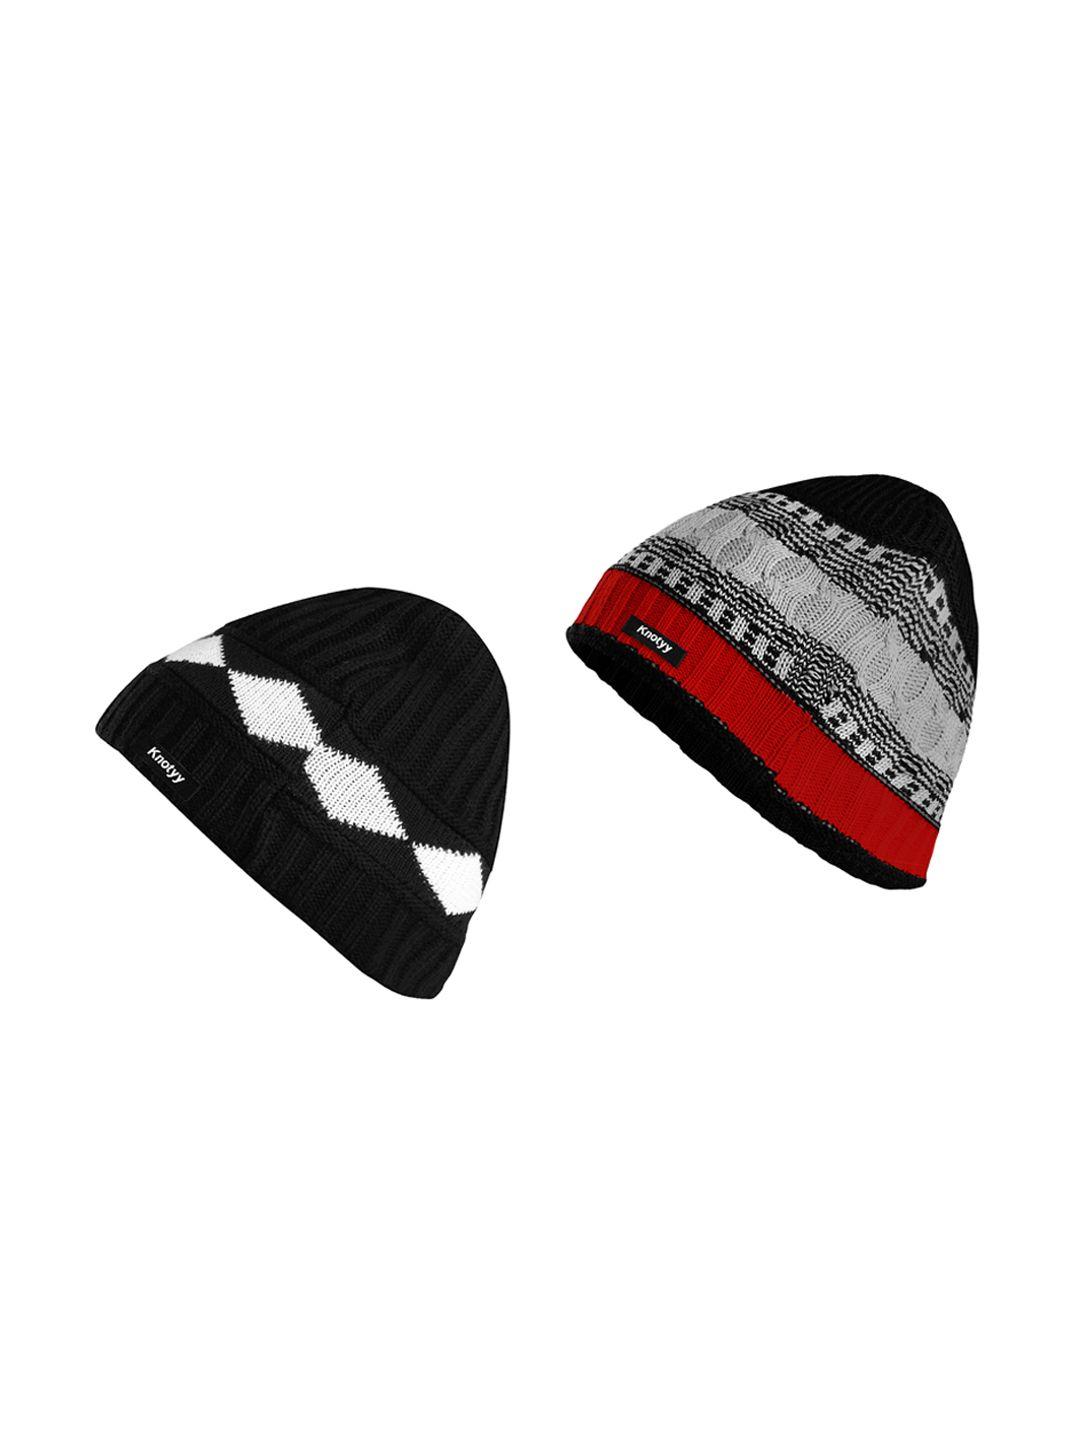 knotyy men pack of 2 beanies